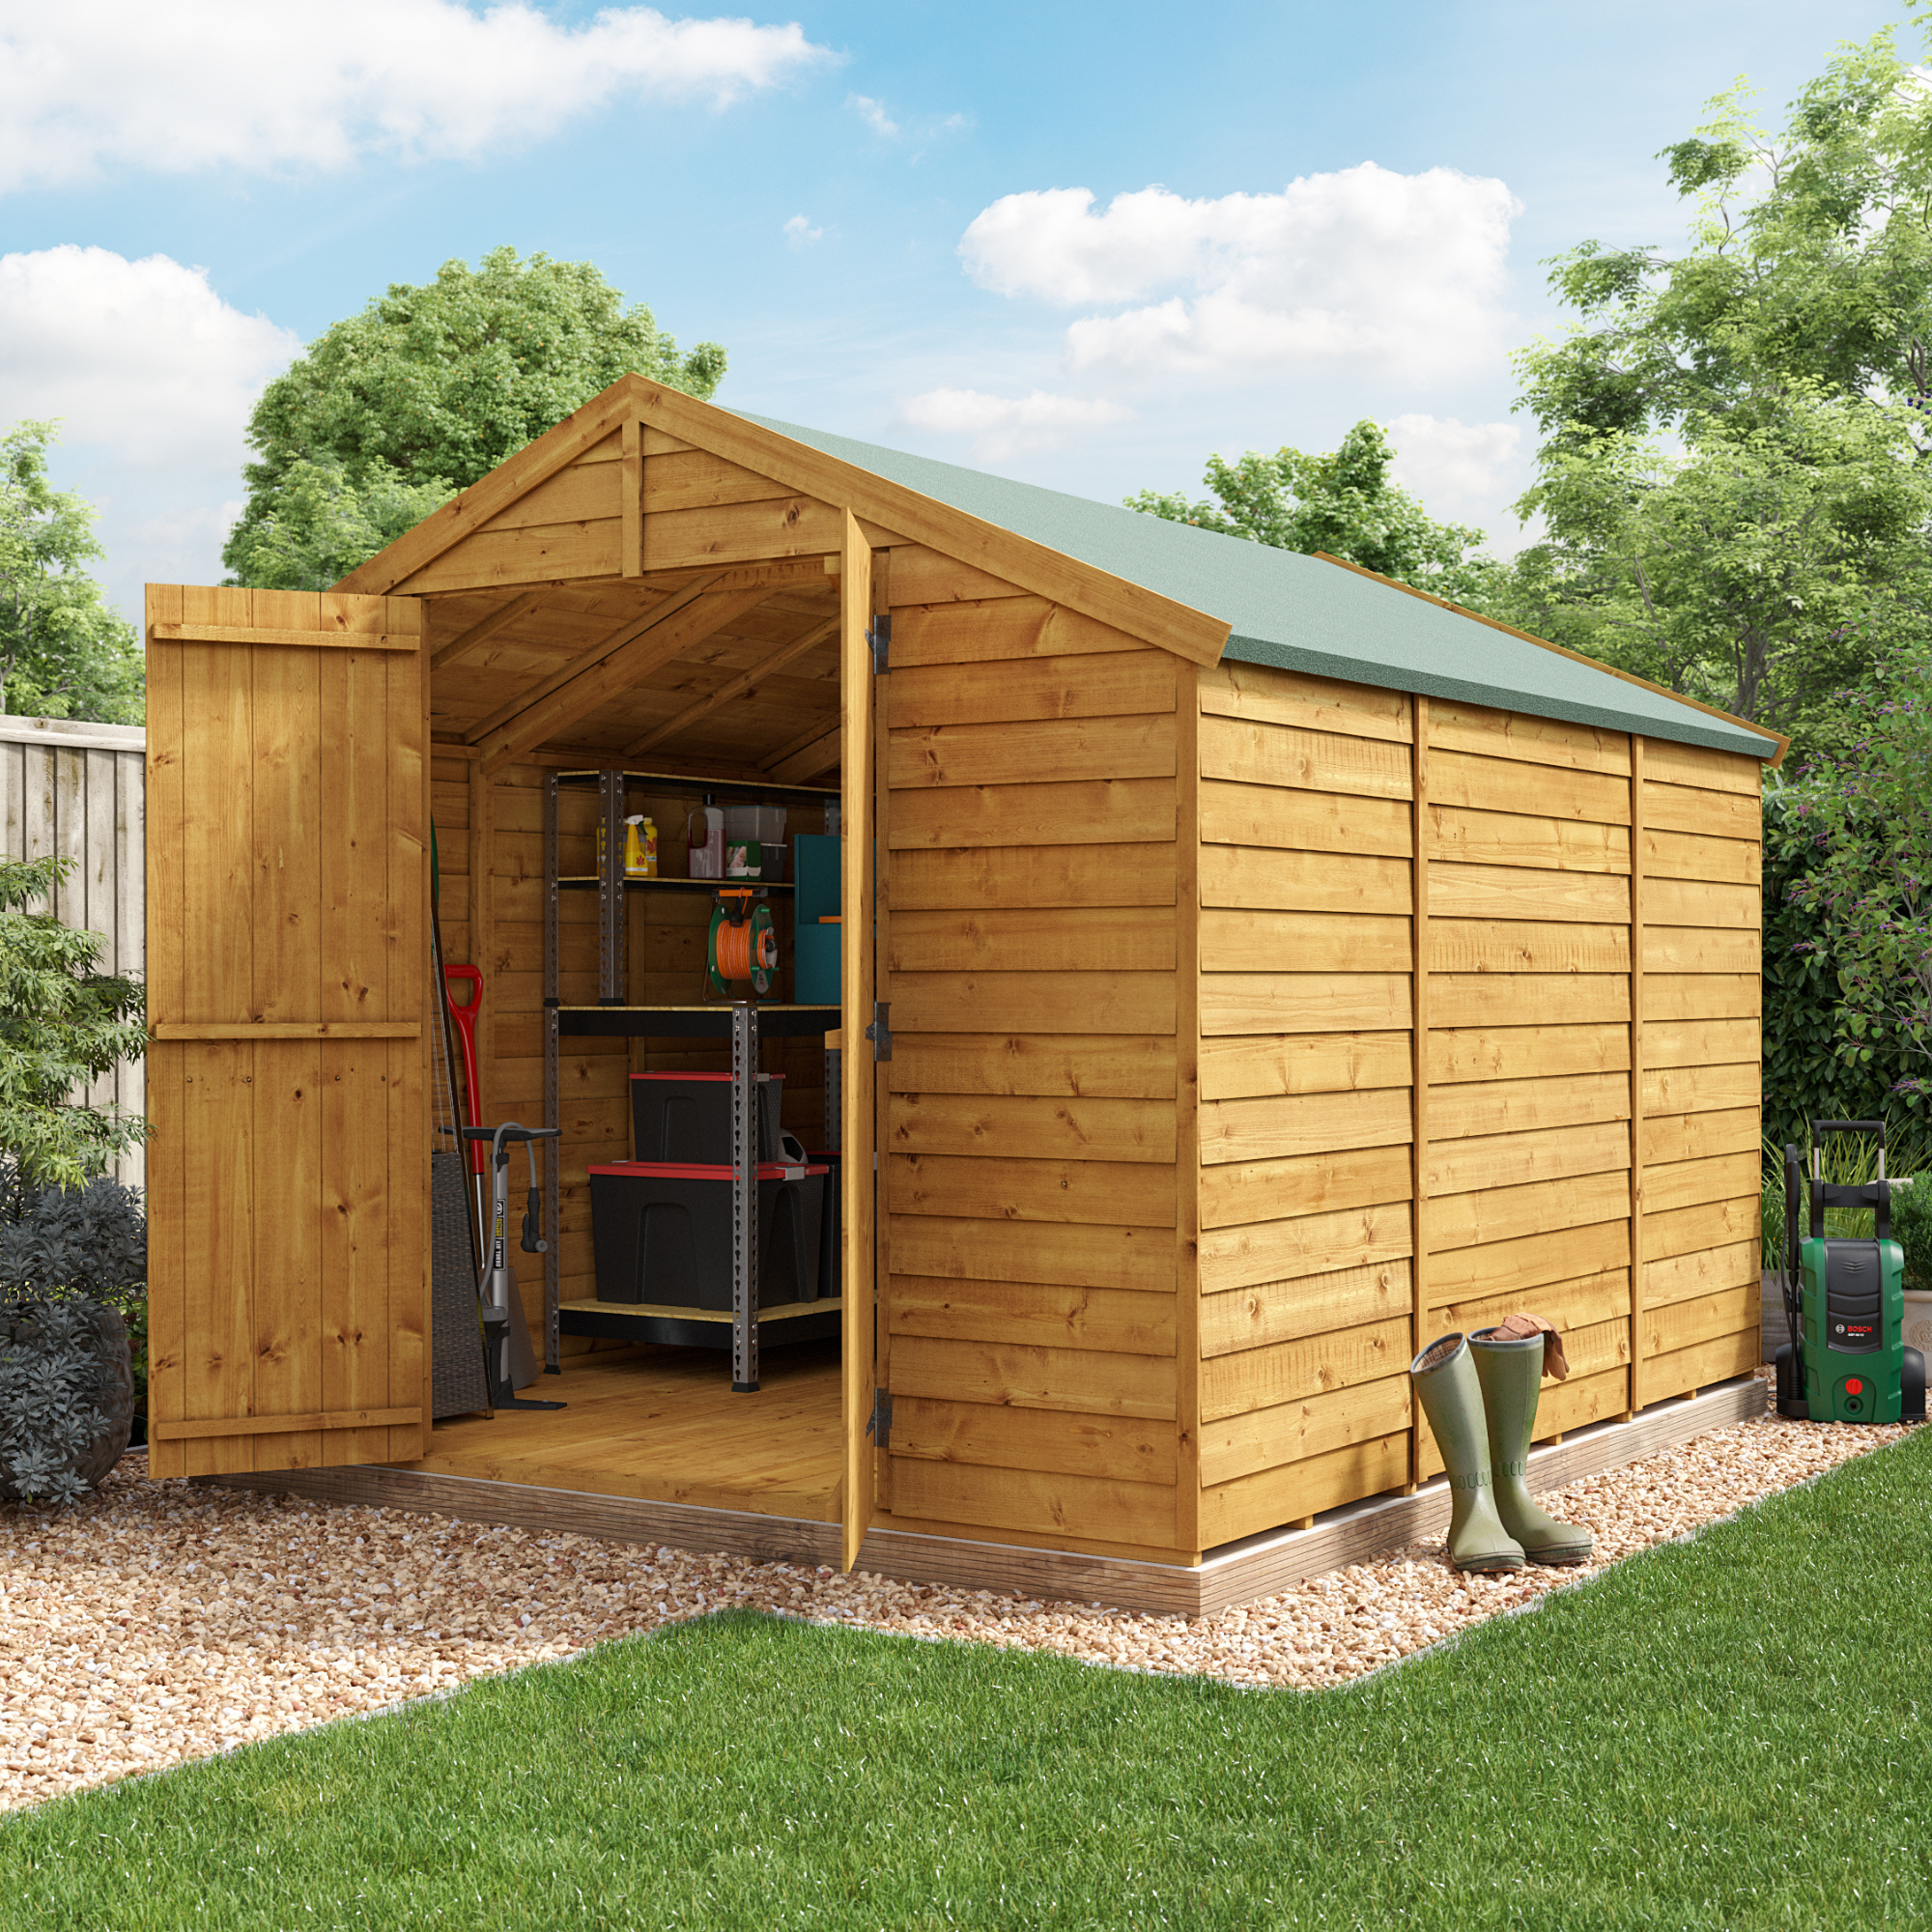 10 x 8 Shed - BillyOh Keeper Overlap Apex Wooden Shed - Windowless 10x8 Garden Shed